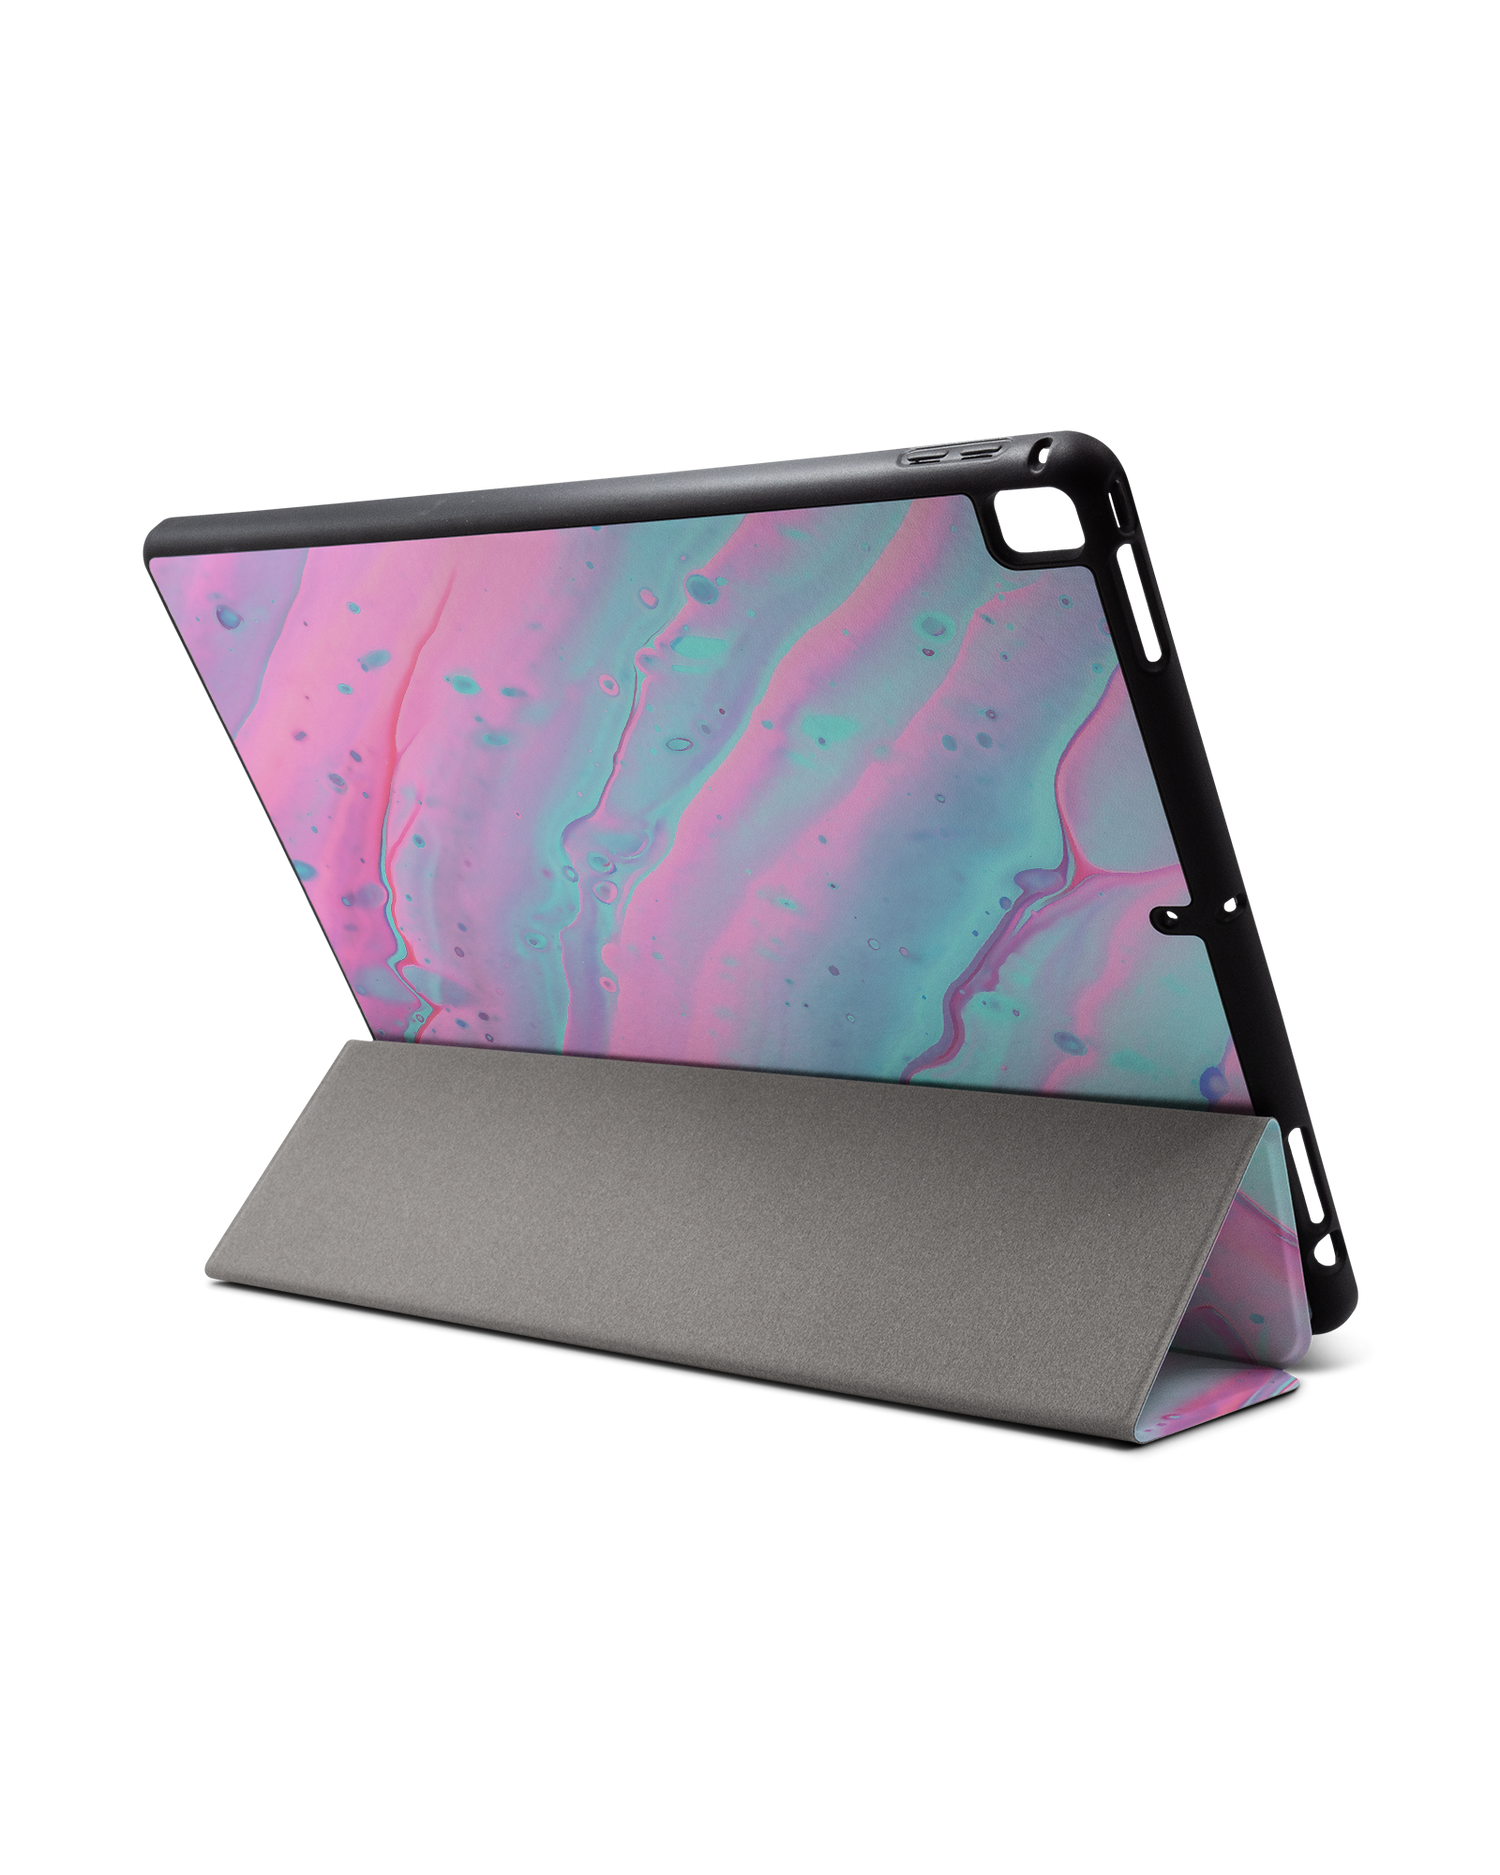 Wavey iPad Case with Pencil Holder for Apple iPad Pro 2 12.9